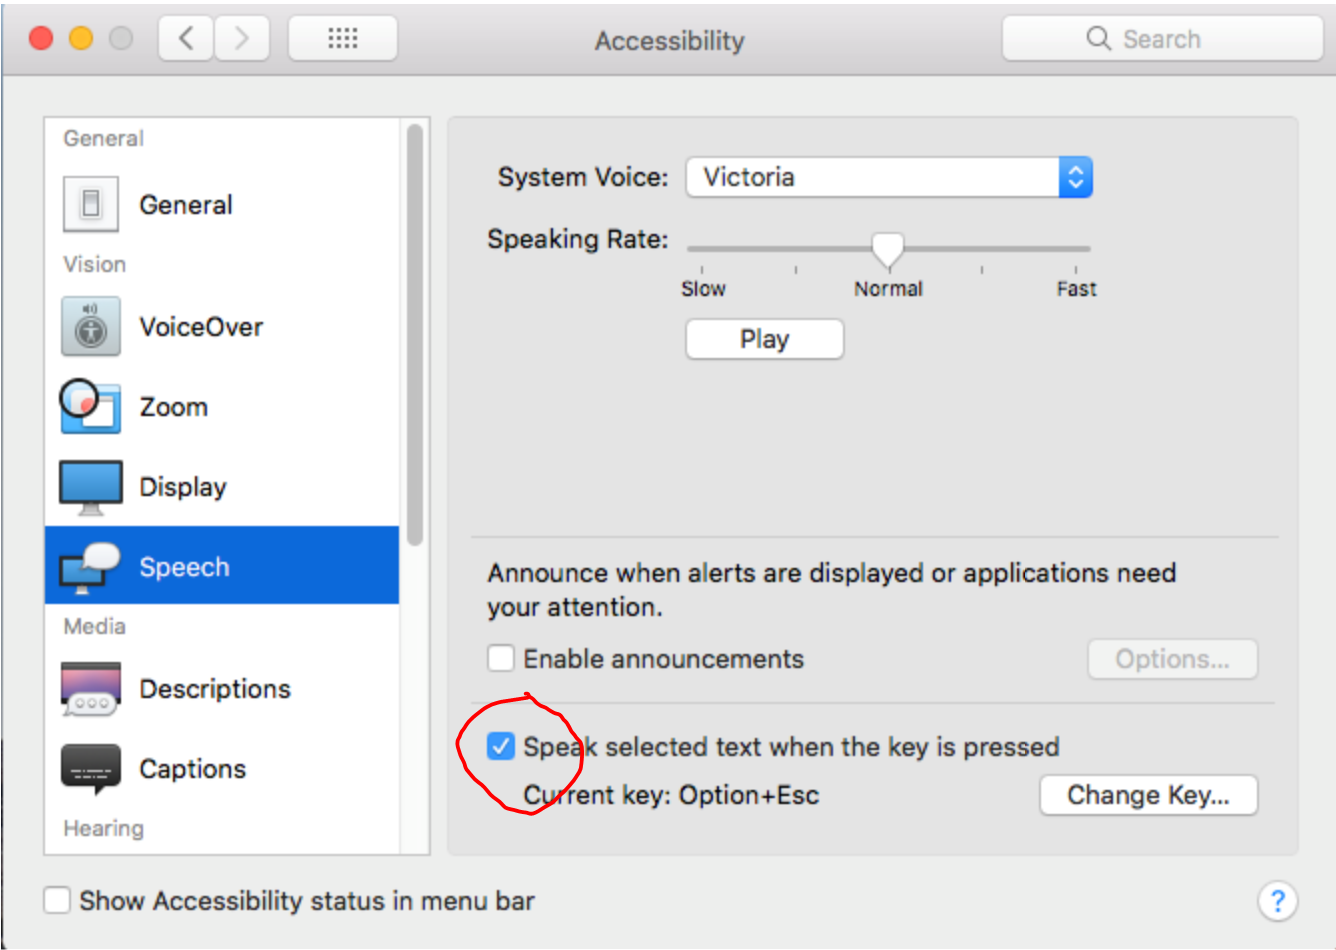 in the accessibility setting the speak selected text when the key is pressed is checked